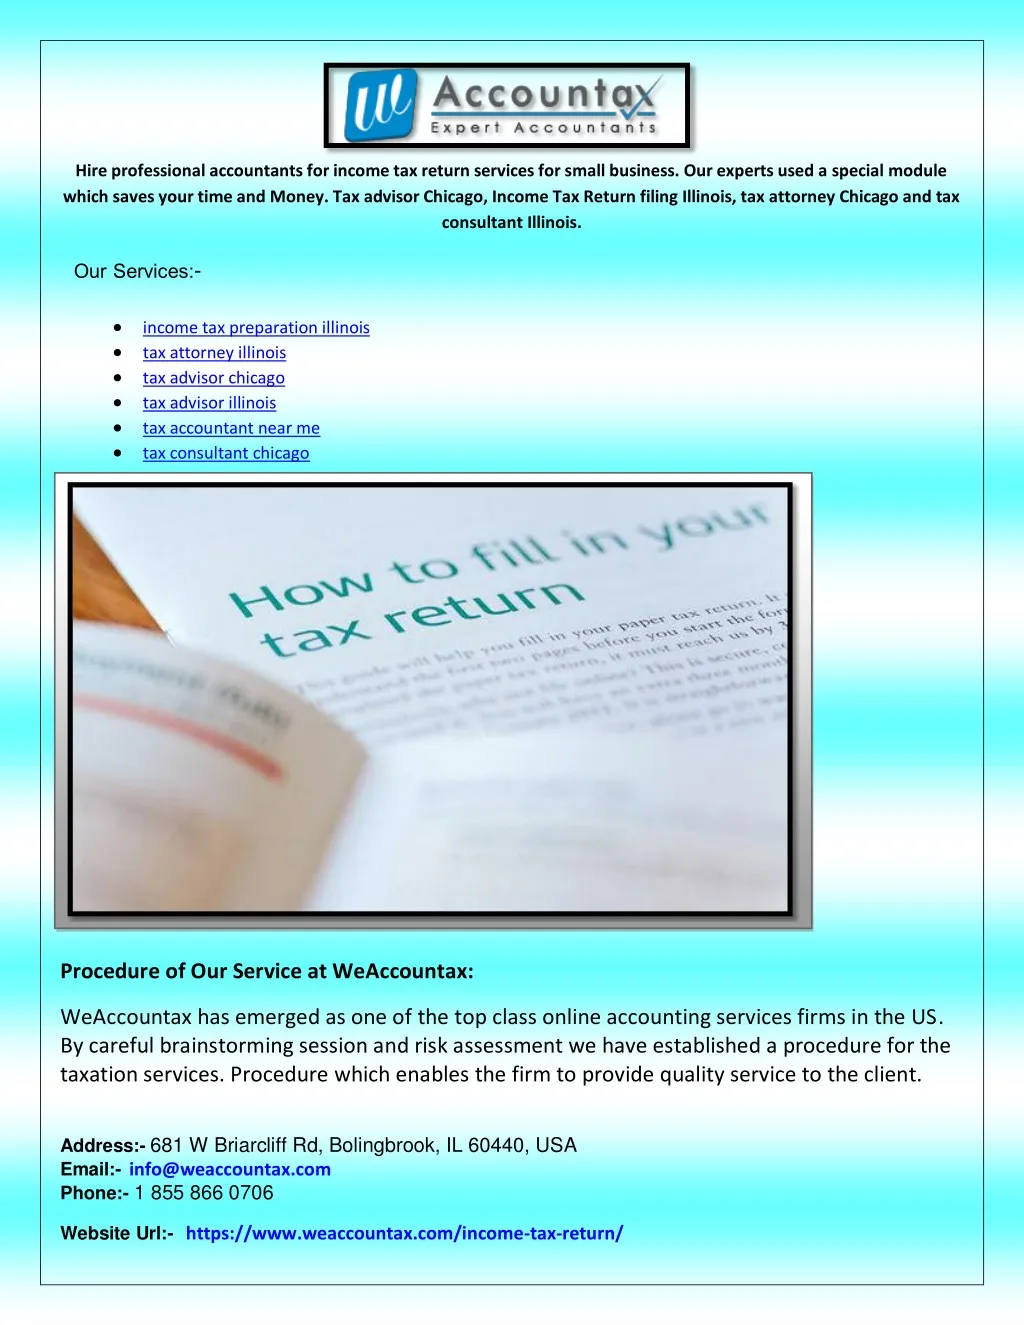 ppt-tax-preparation-services-powerpoint-presentation-free-download